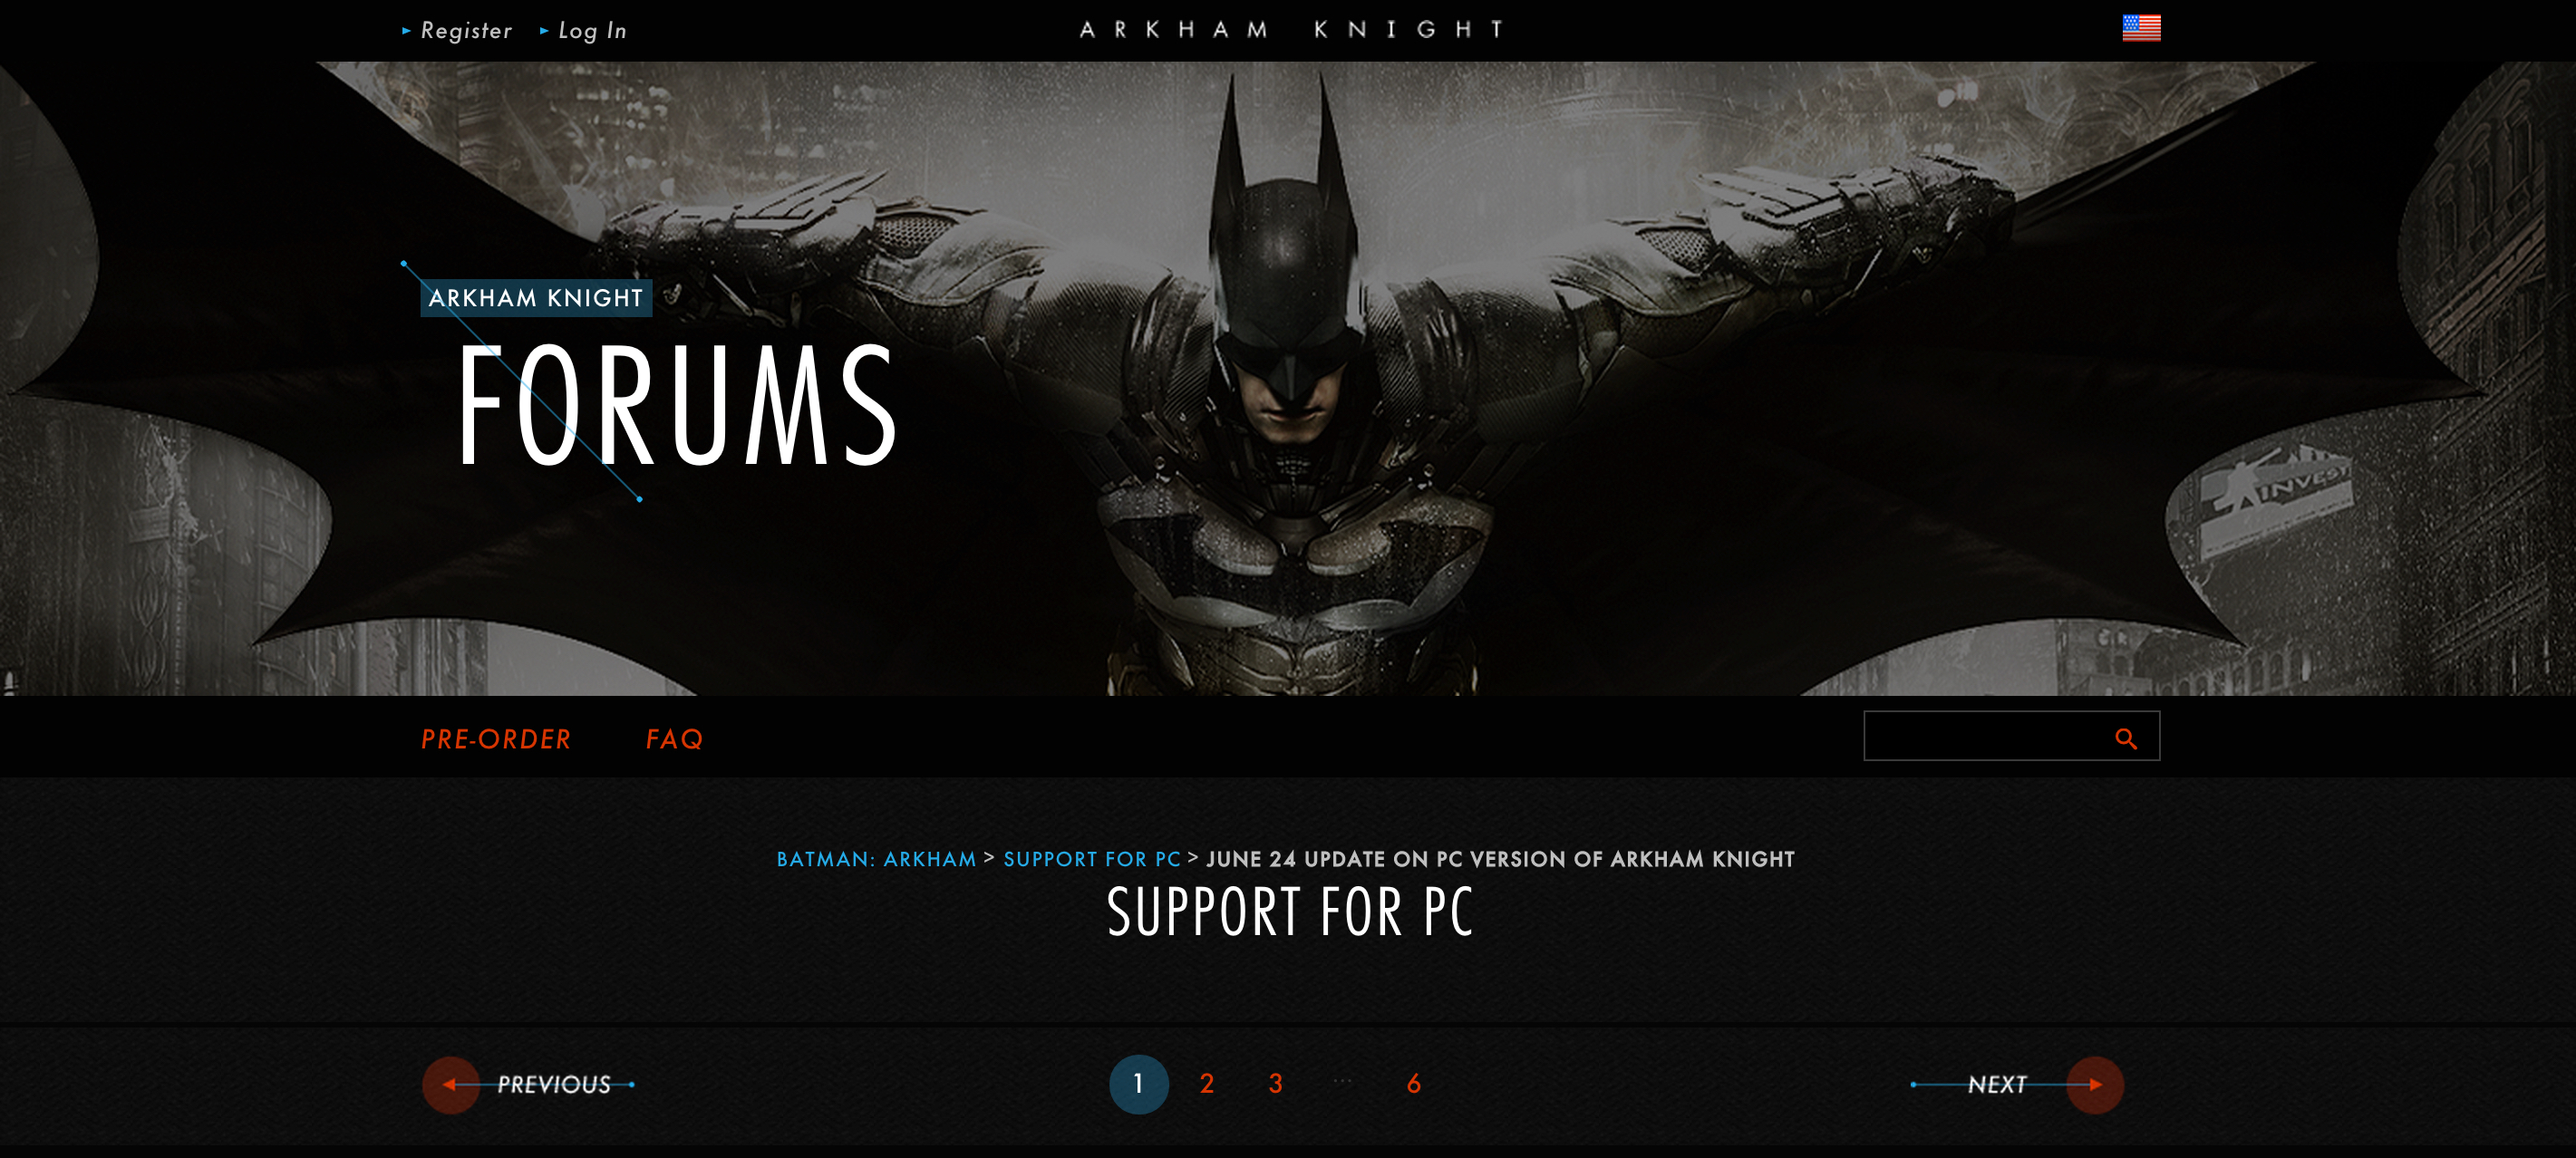 Batman: Arkham Knight for PC pulled from Steam and retailers due to bugs |  Ars Technica